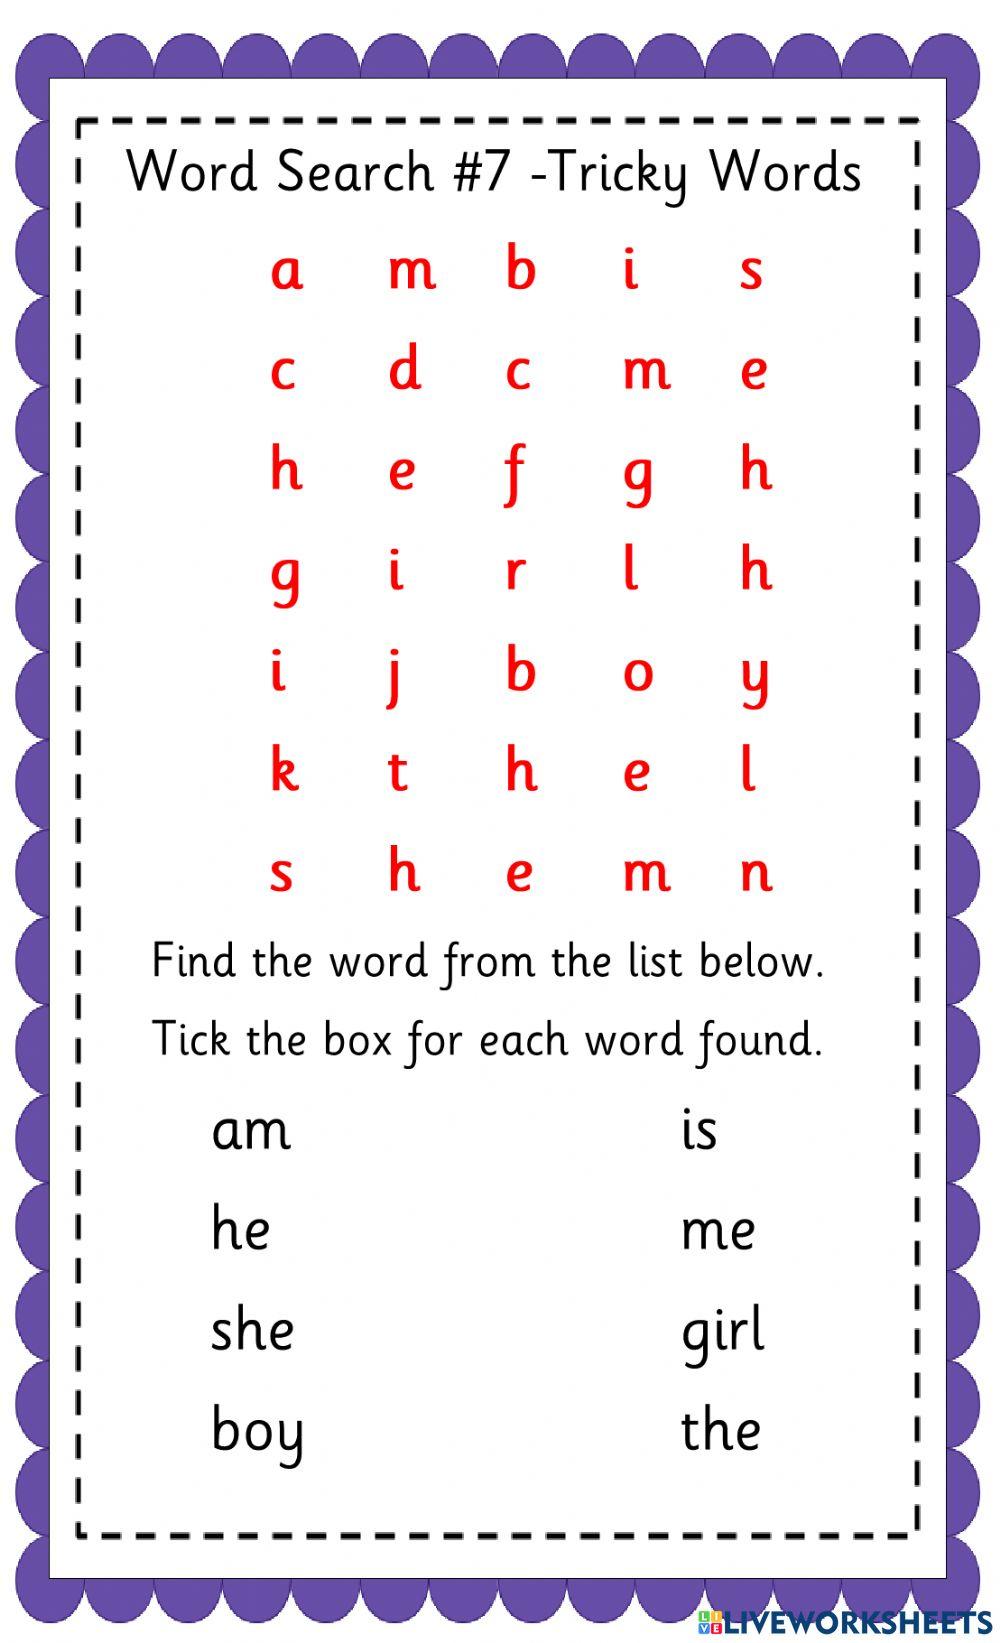 Tricky Words - Word Search -7